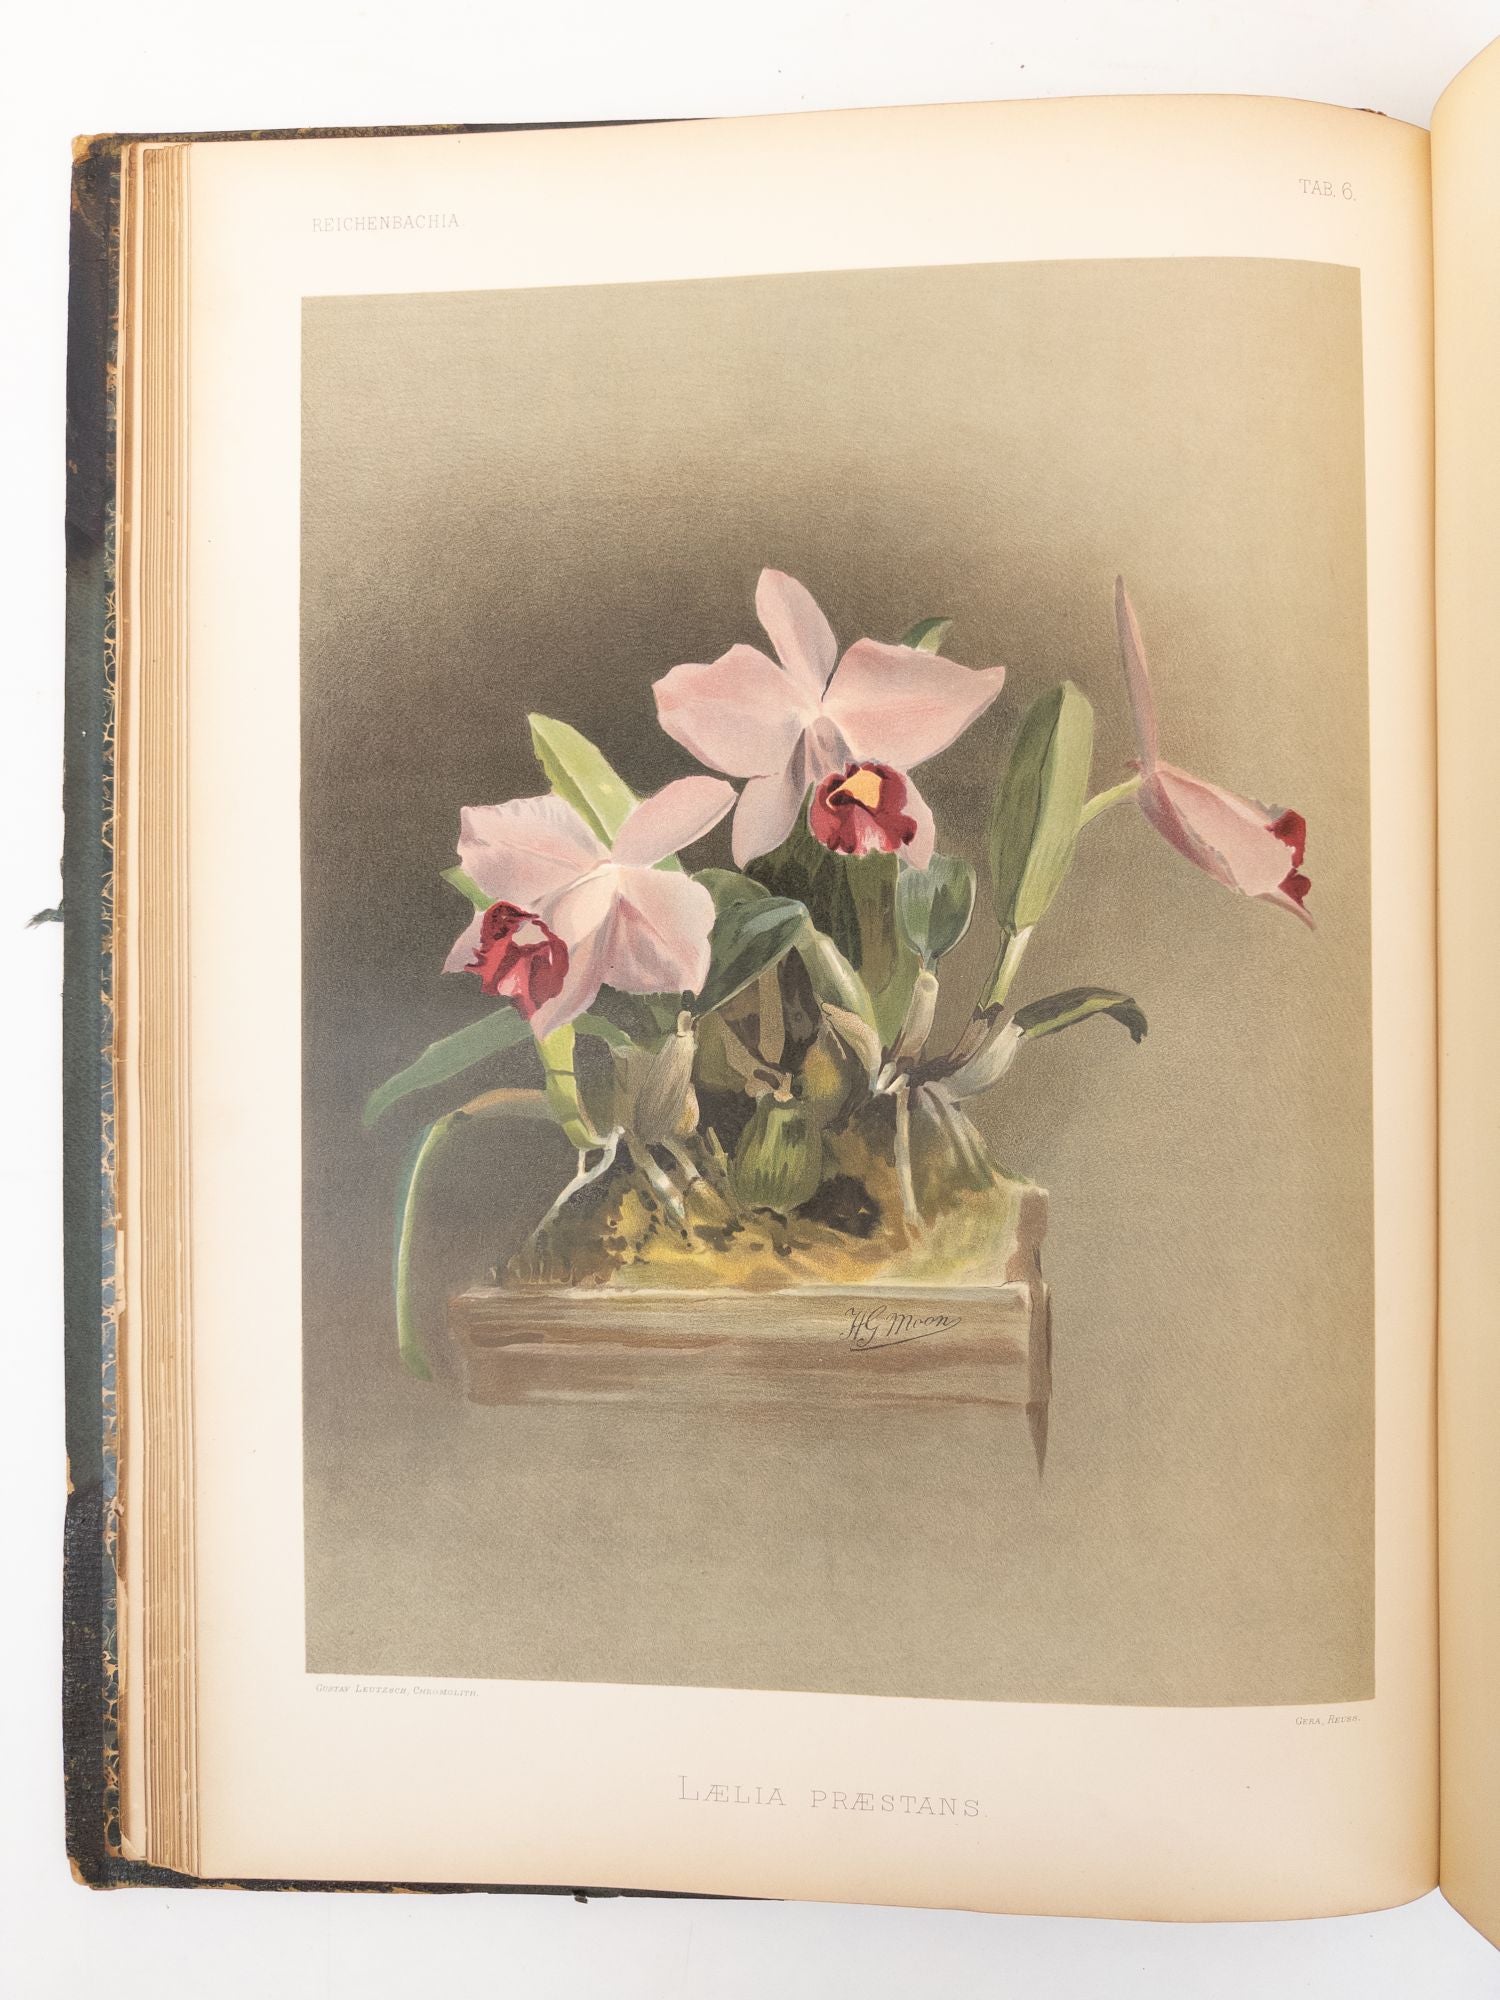 Product Image for REICHENBACHIA. ORCHIDS ILLUSTRATED AND DESCRIBED [Four Volumes]